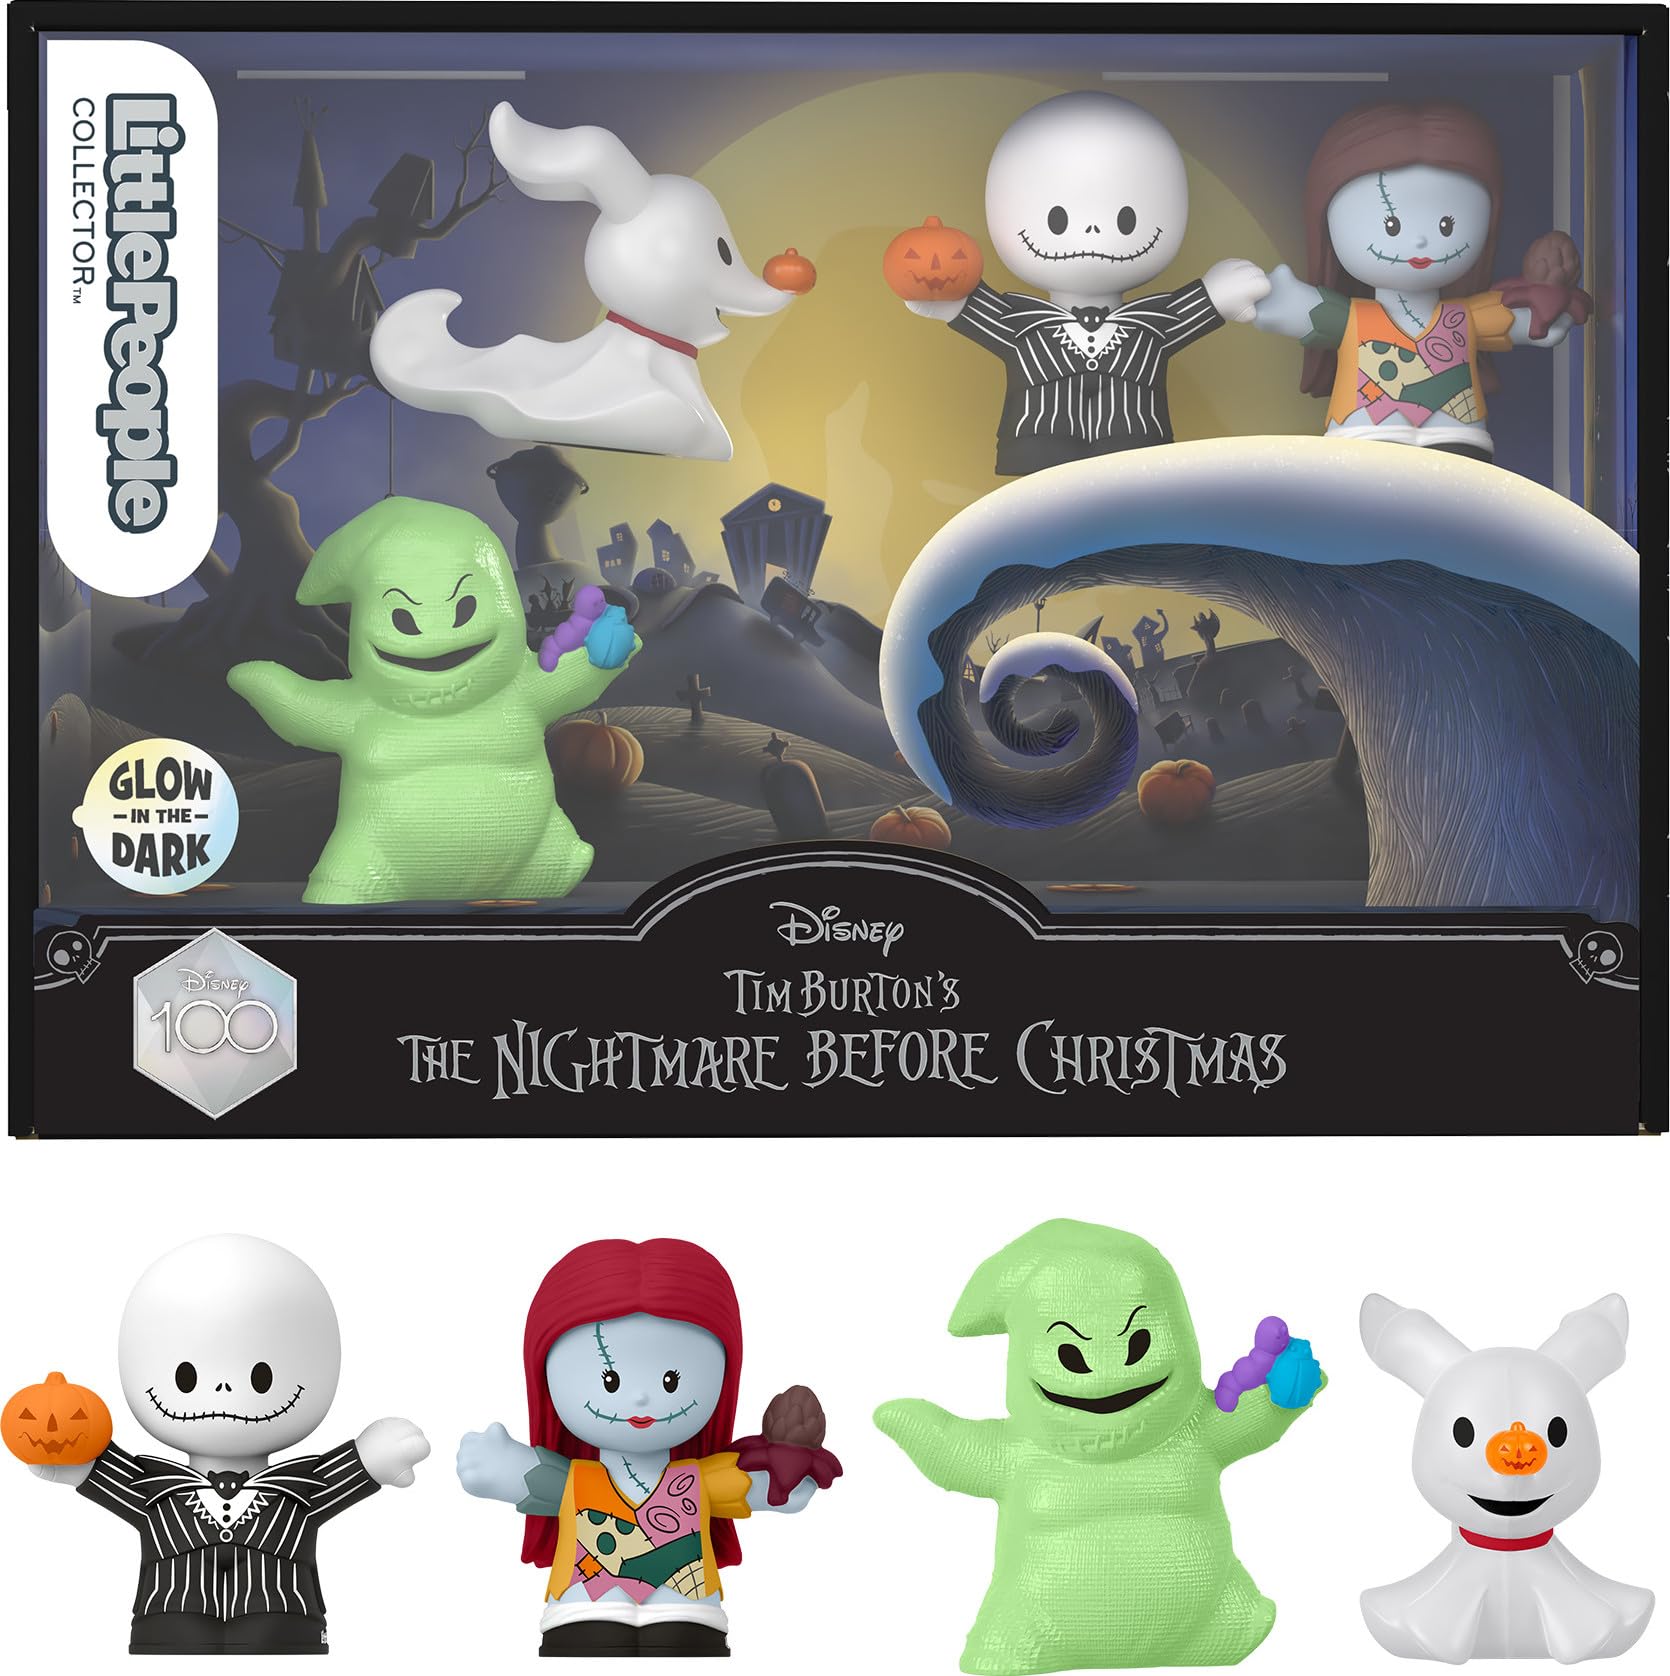 Little People Collector Disney Tim Burton’S The Nightmare Before Christmas Special Edition Set For Adults And Fans, 4 Figures